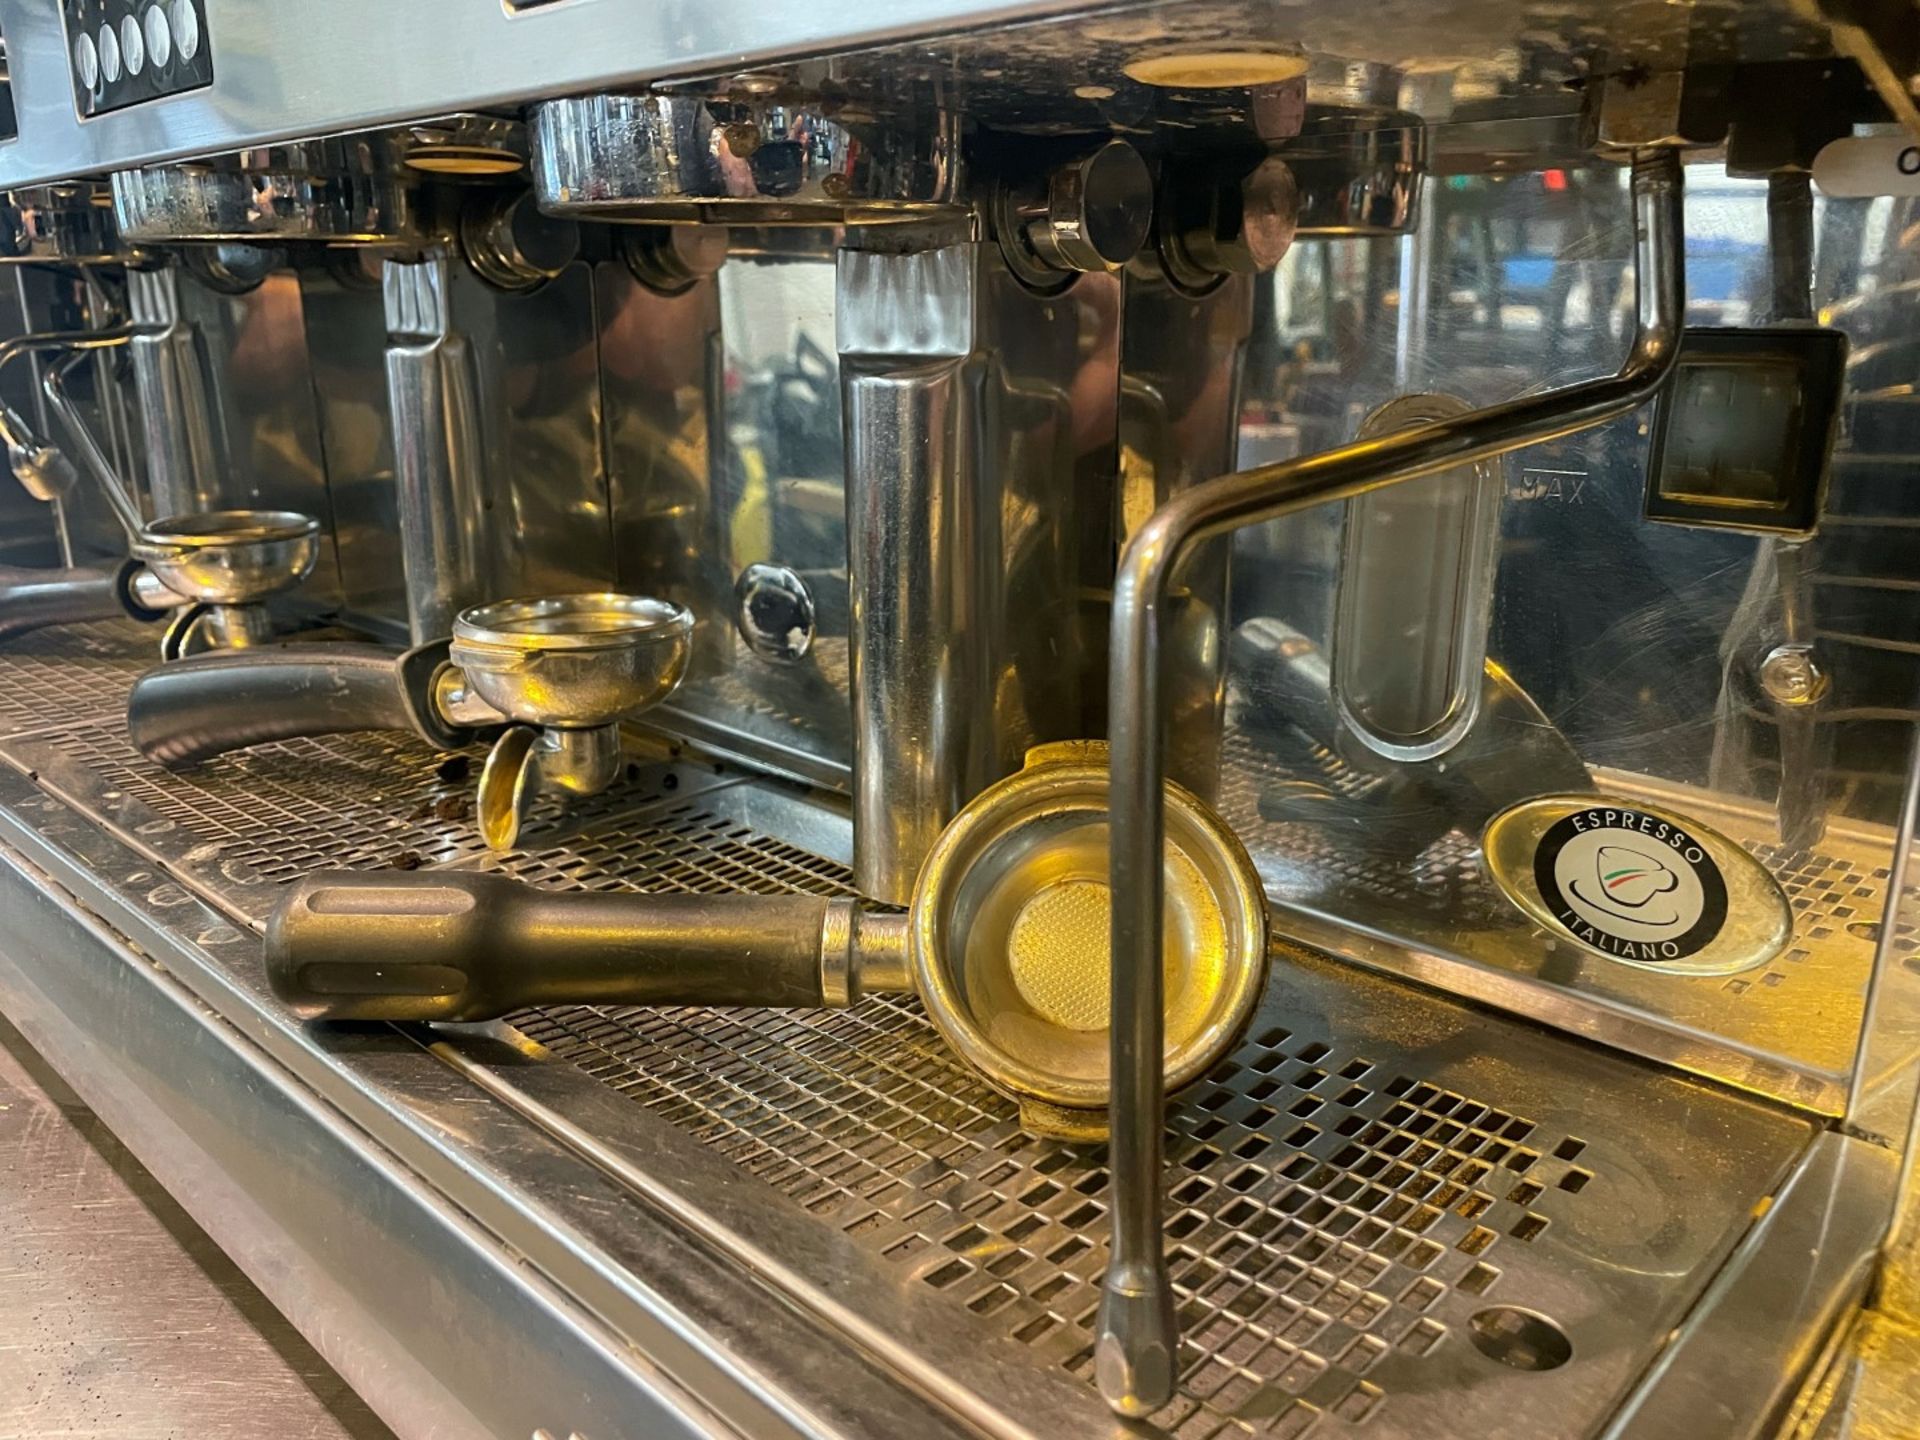 1 x Polaris Wega 3 Group Commercial Espresso Coffee Machine - Stainless Steel Finish - Approx 100cms - Image 7 of 7